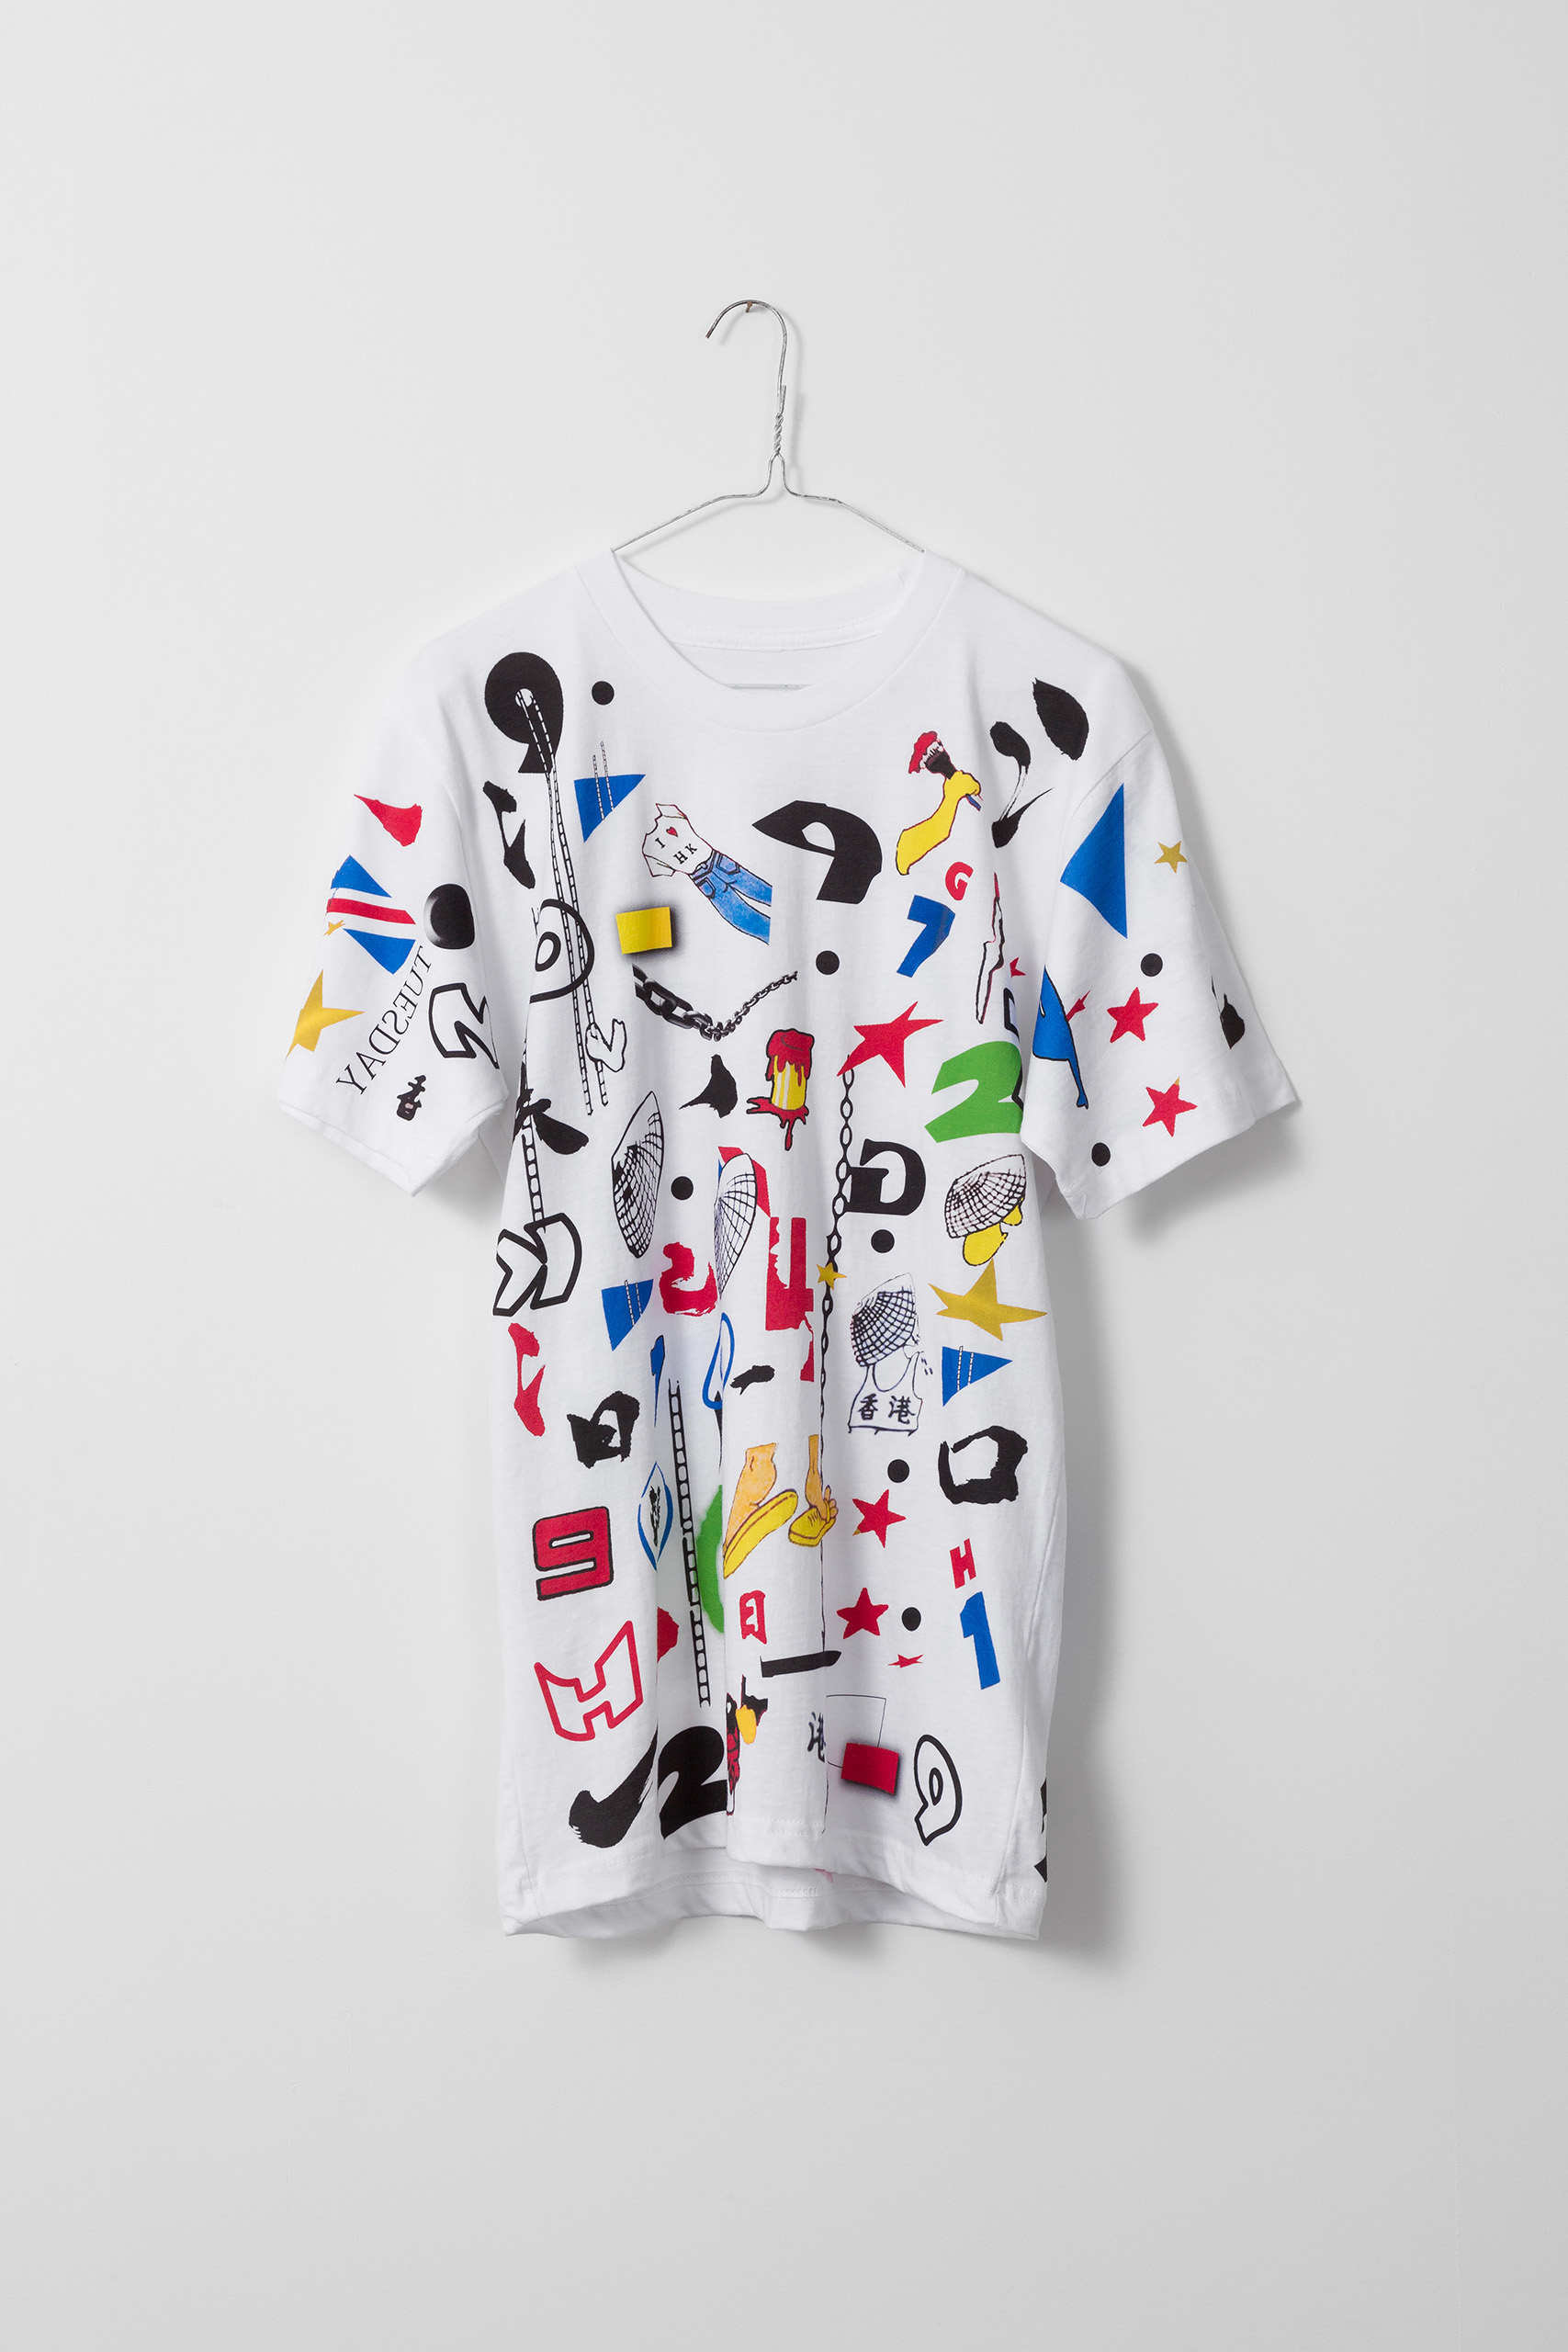 White t-shirt printed all over with letters, shapes, and parts of the original flag painter t-shirt design